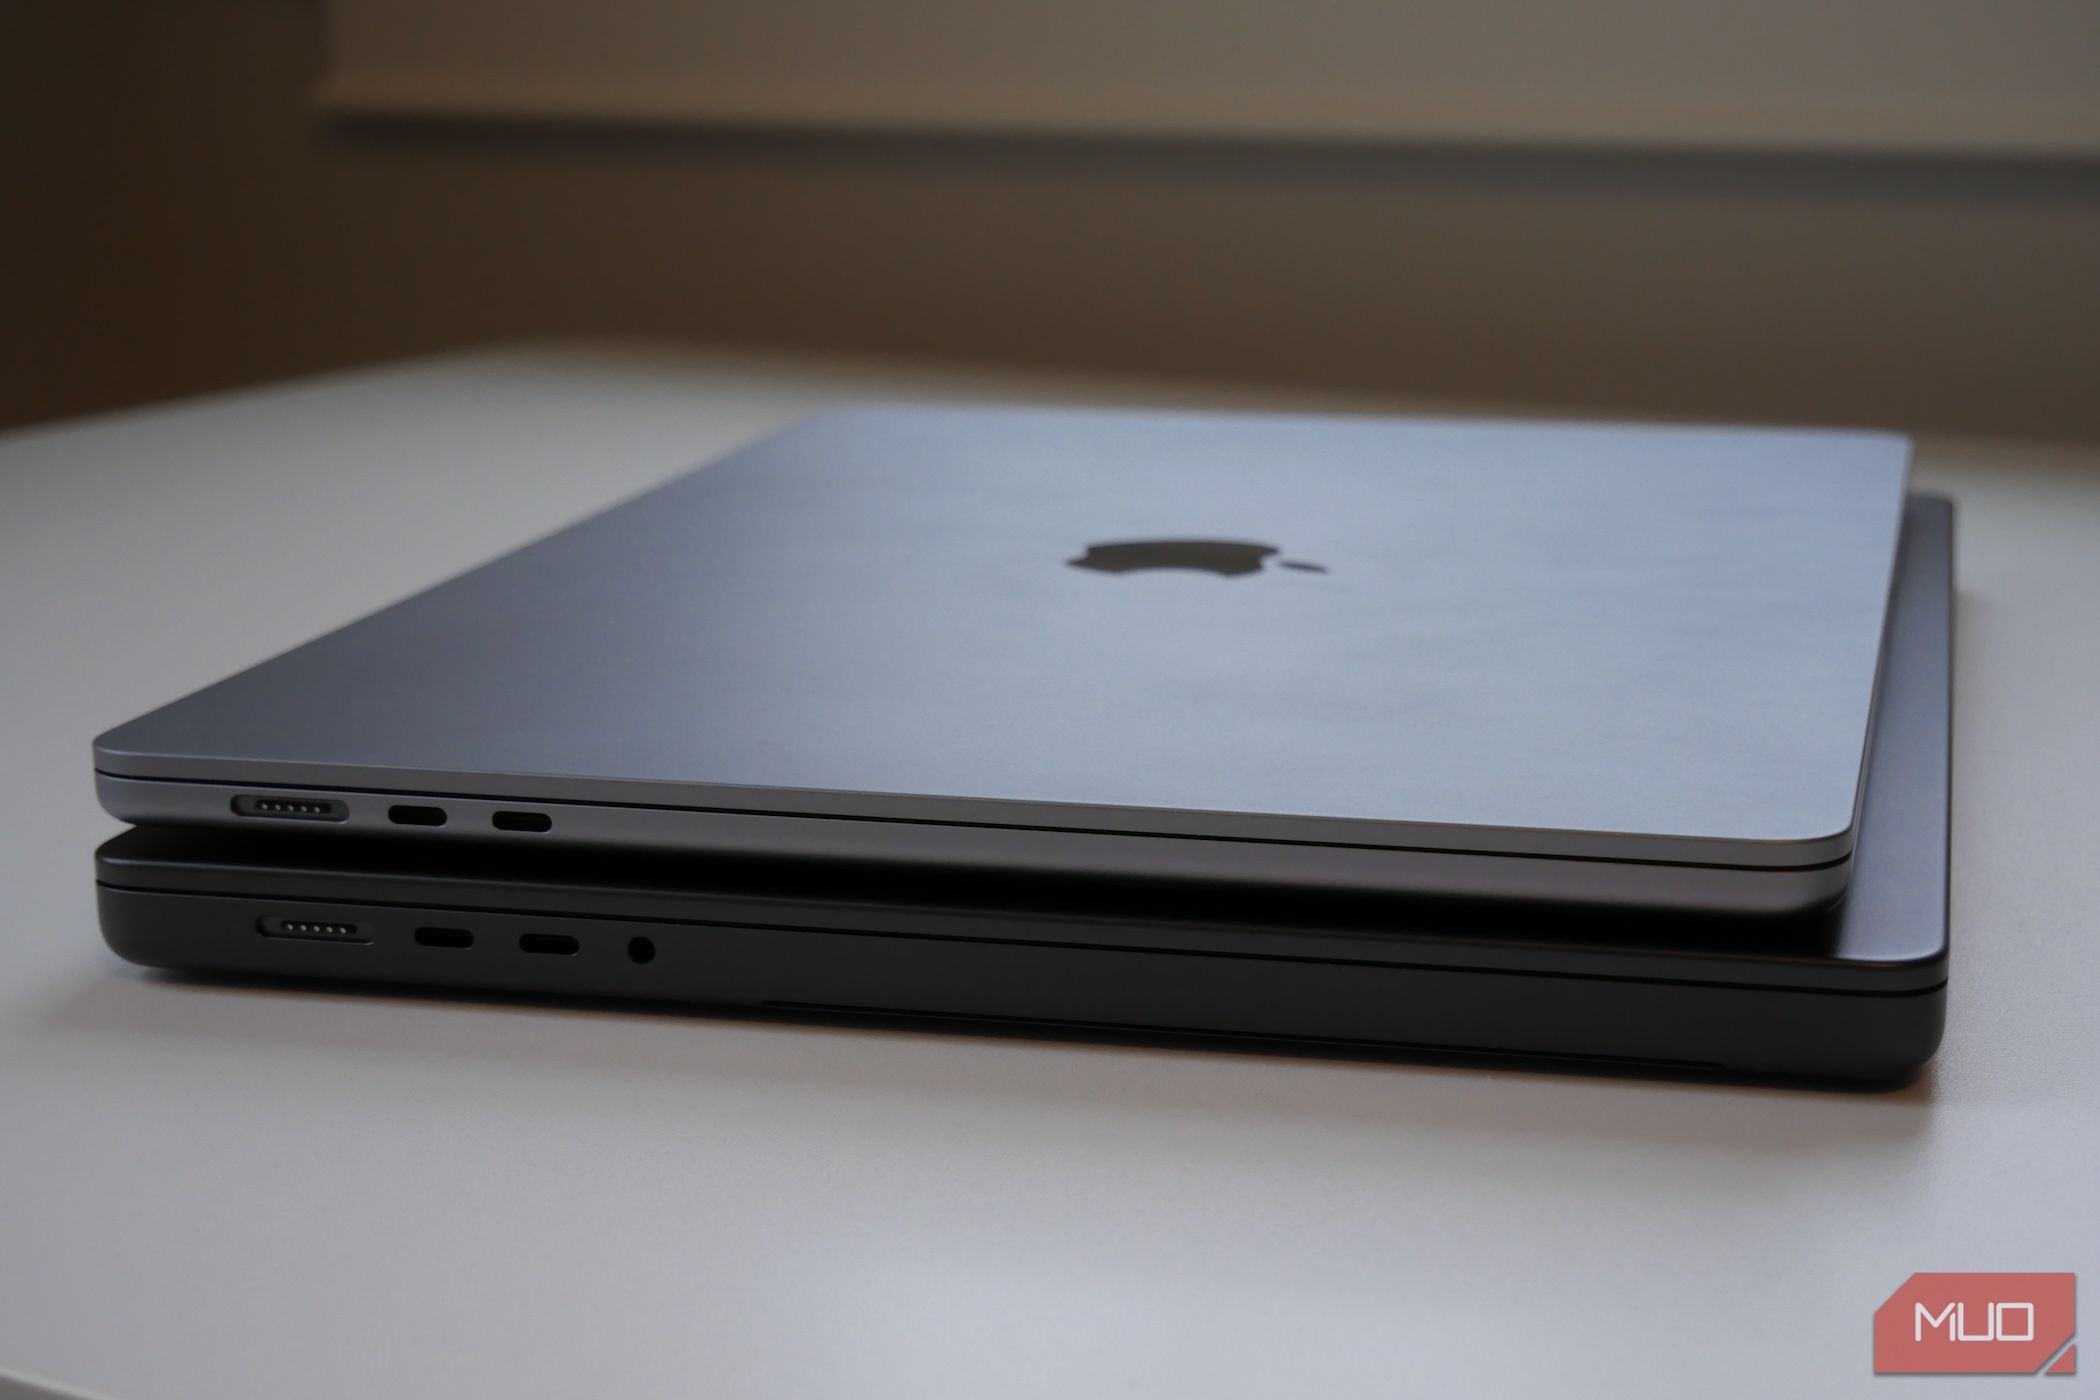 Space Black vs Space Gray (15-inch MacBook Air and 16-inch MacBook Pro)